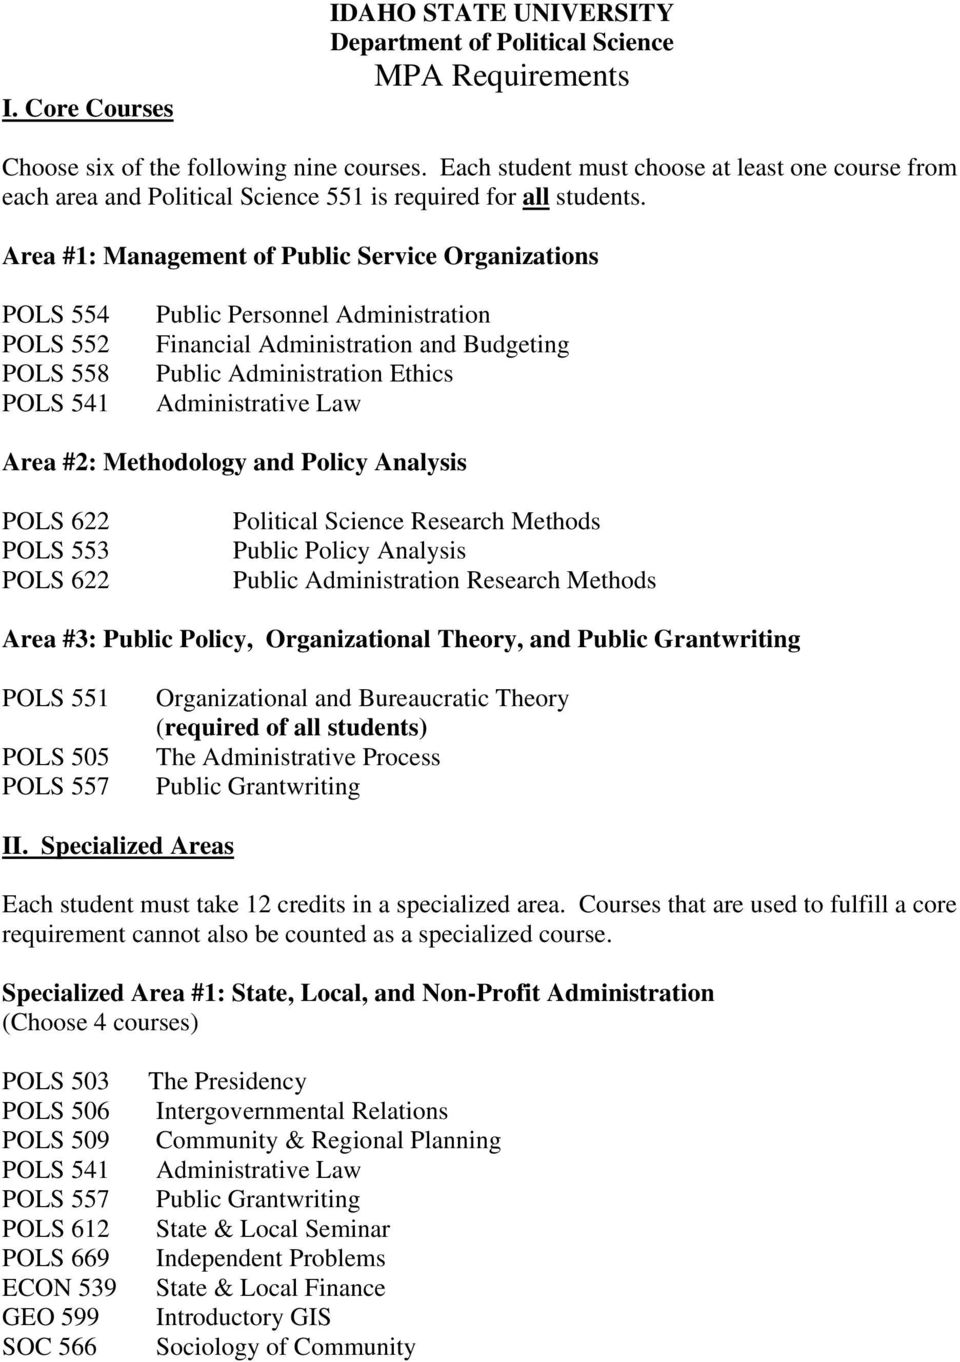 Area #1: Management of Public Service Organizations POLS 554 POLS 552 POLS 558 POLS 541 Public Personnel Administration Financial Administration and Budgeting Public Administration Ethics